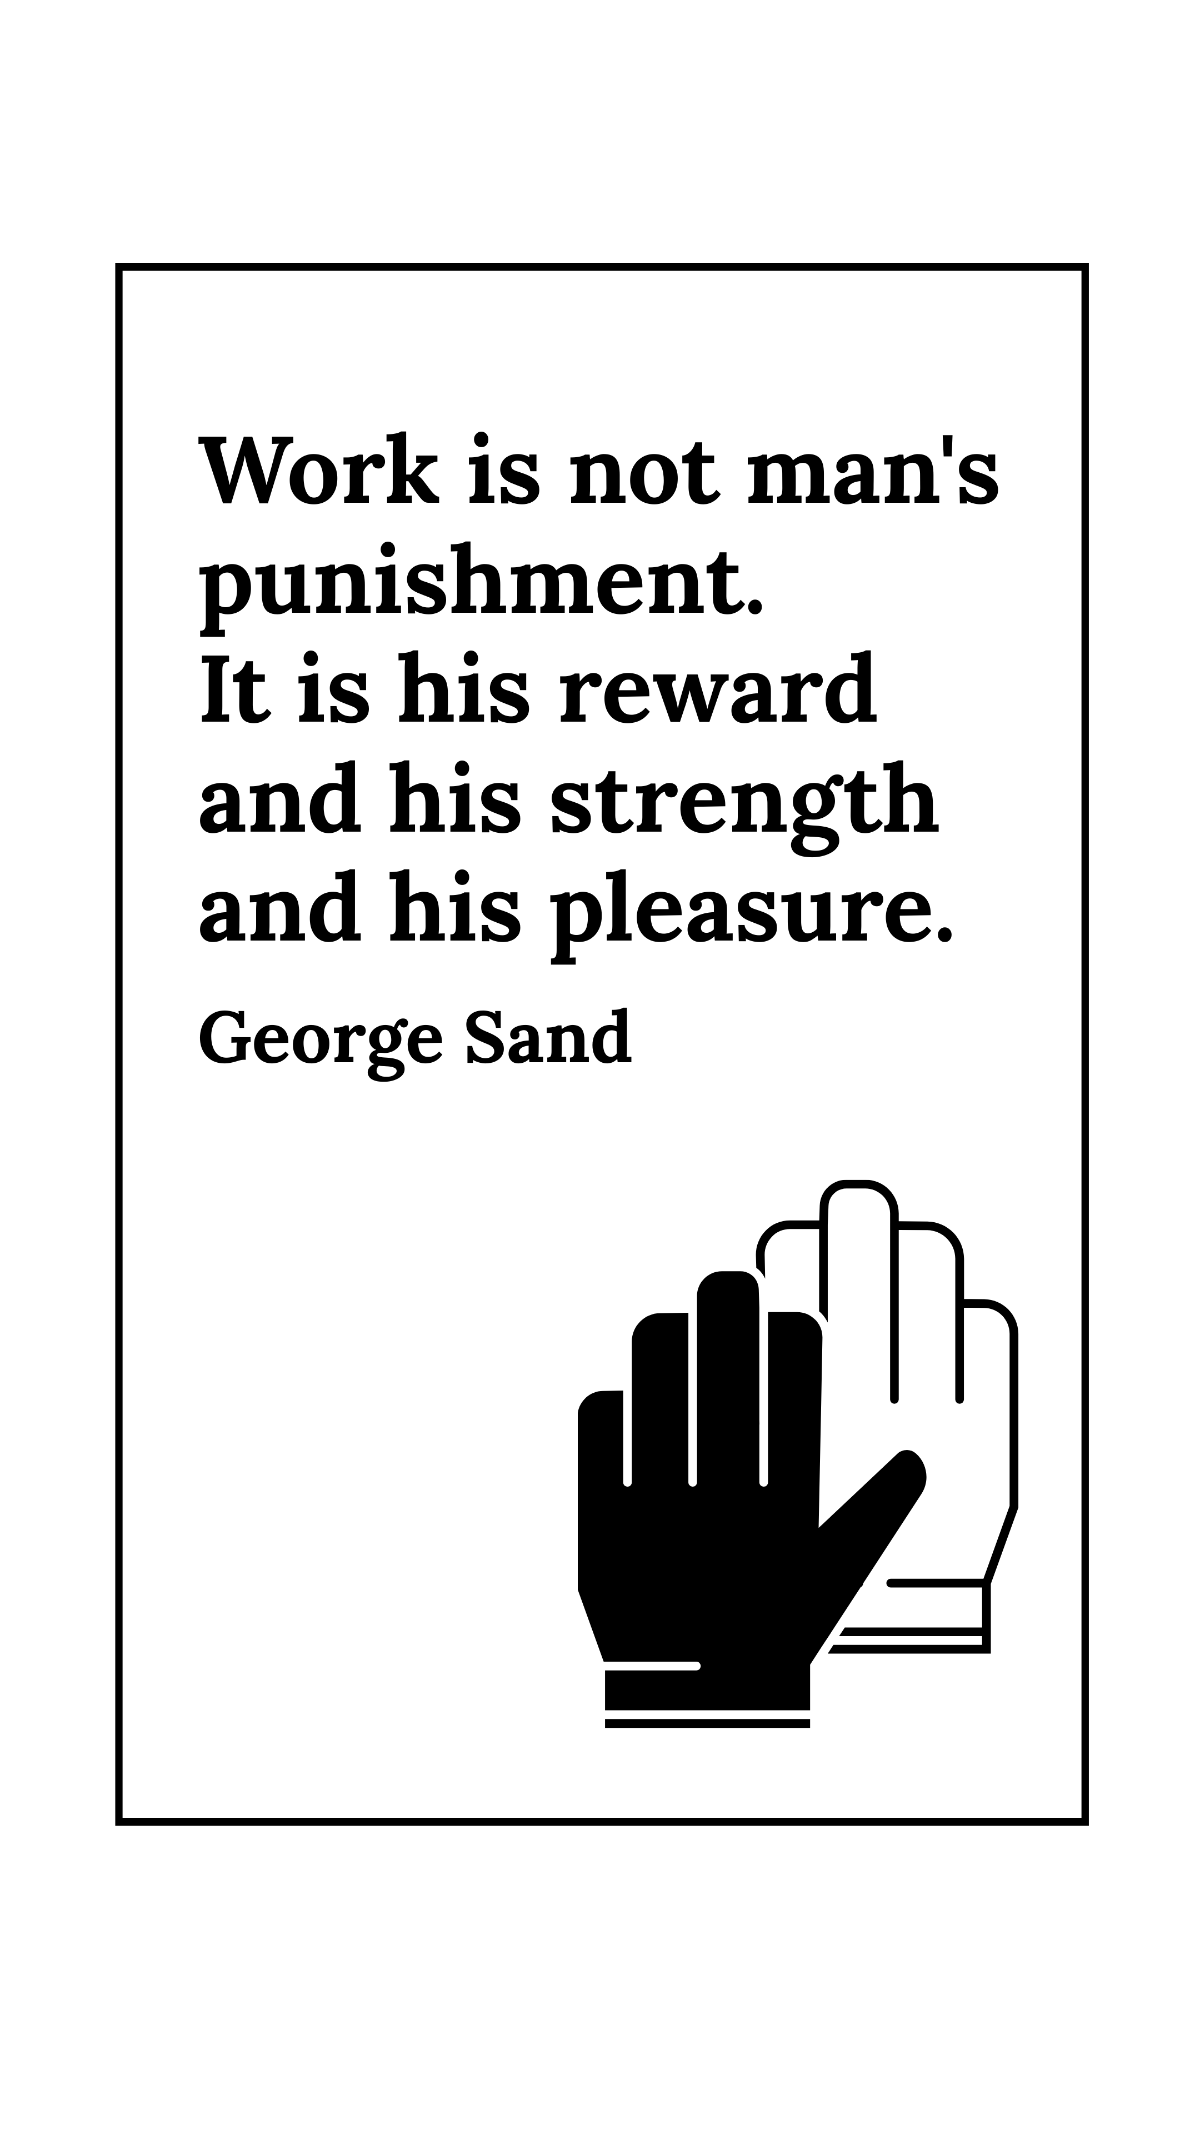 George Sand - Work is not man's punishment. It is his reward and his strength and his pleasure. Template